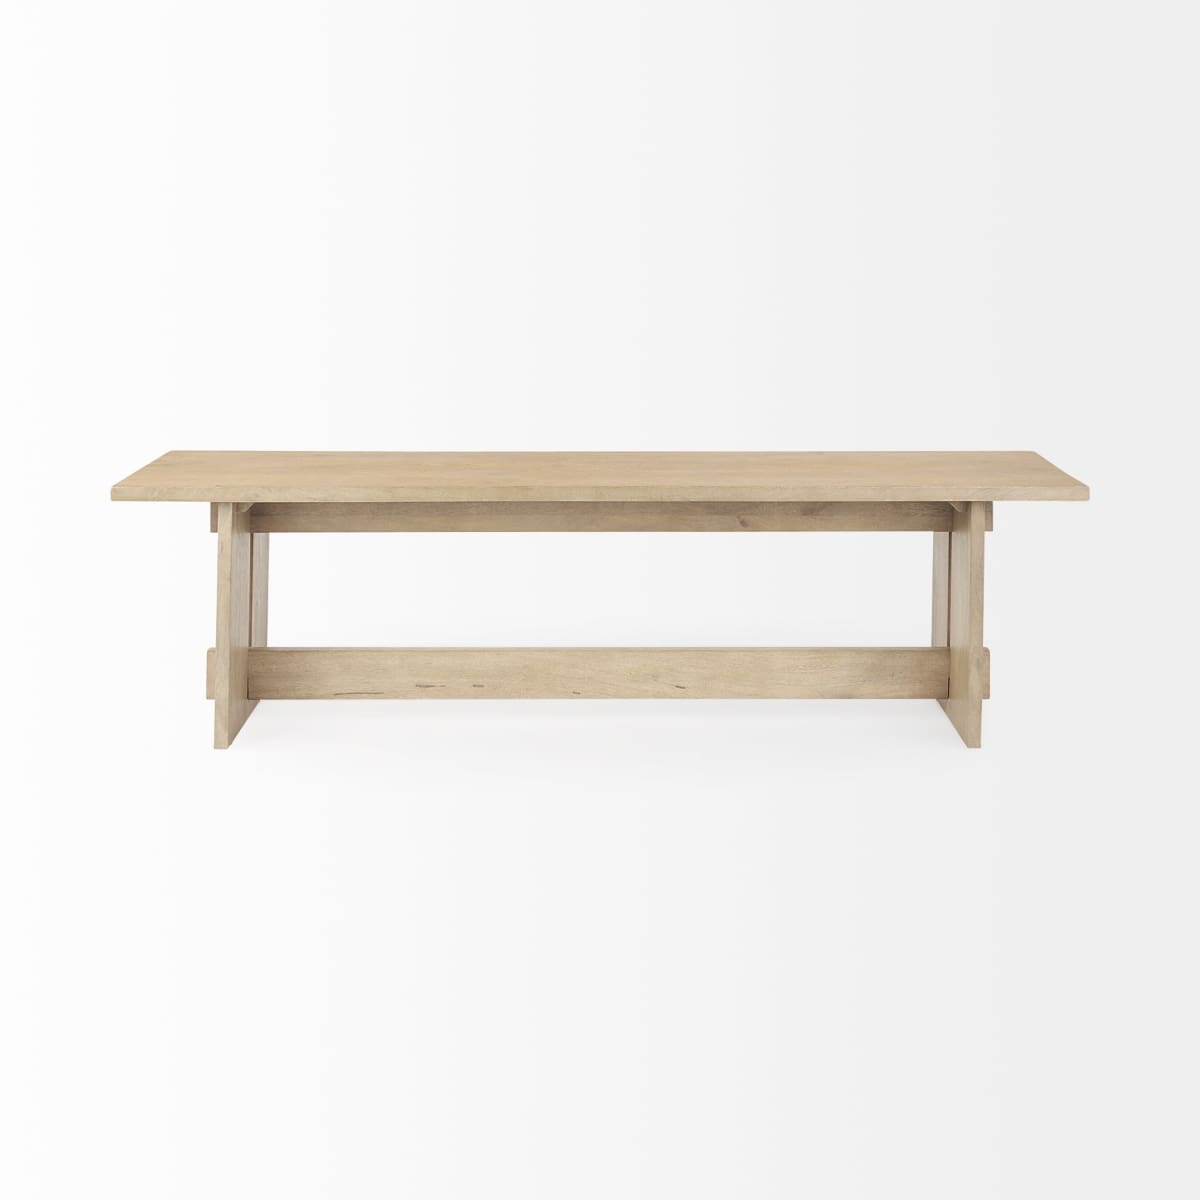 Aida Bench Light Brown Wood - benches